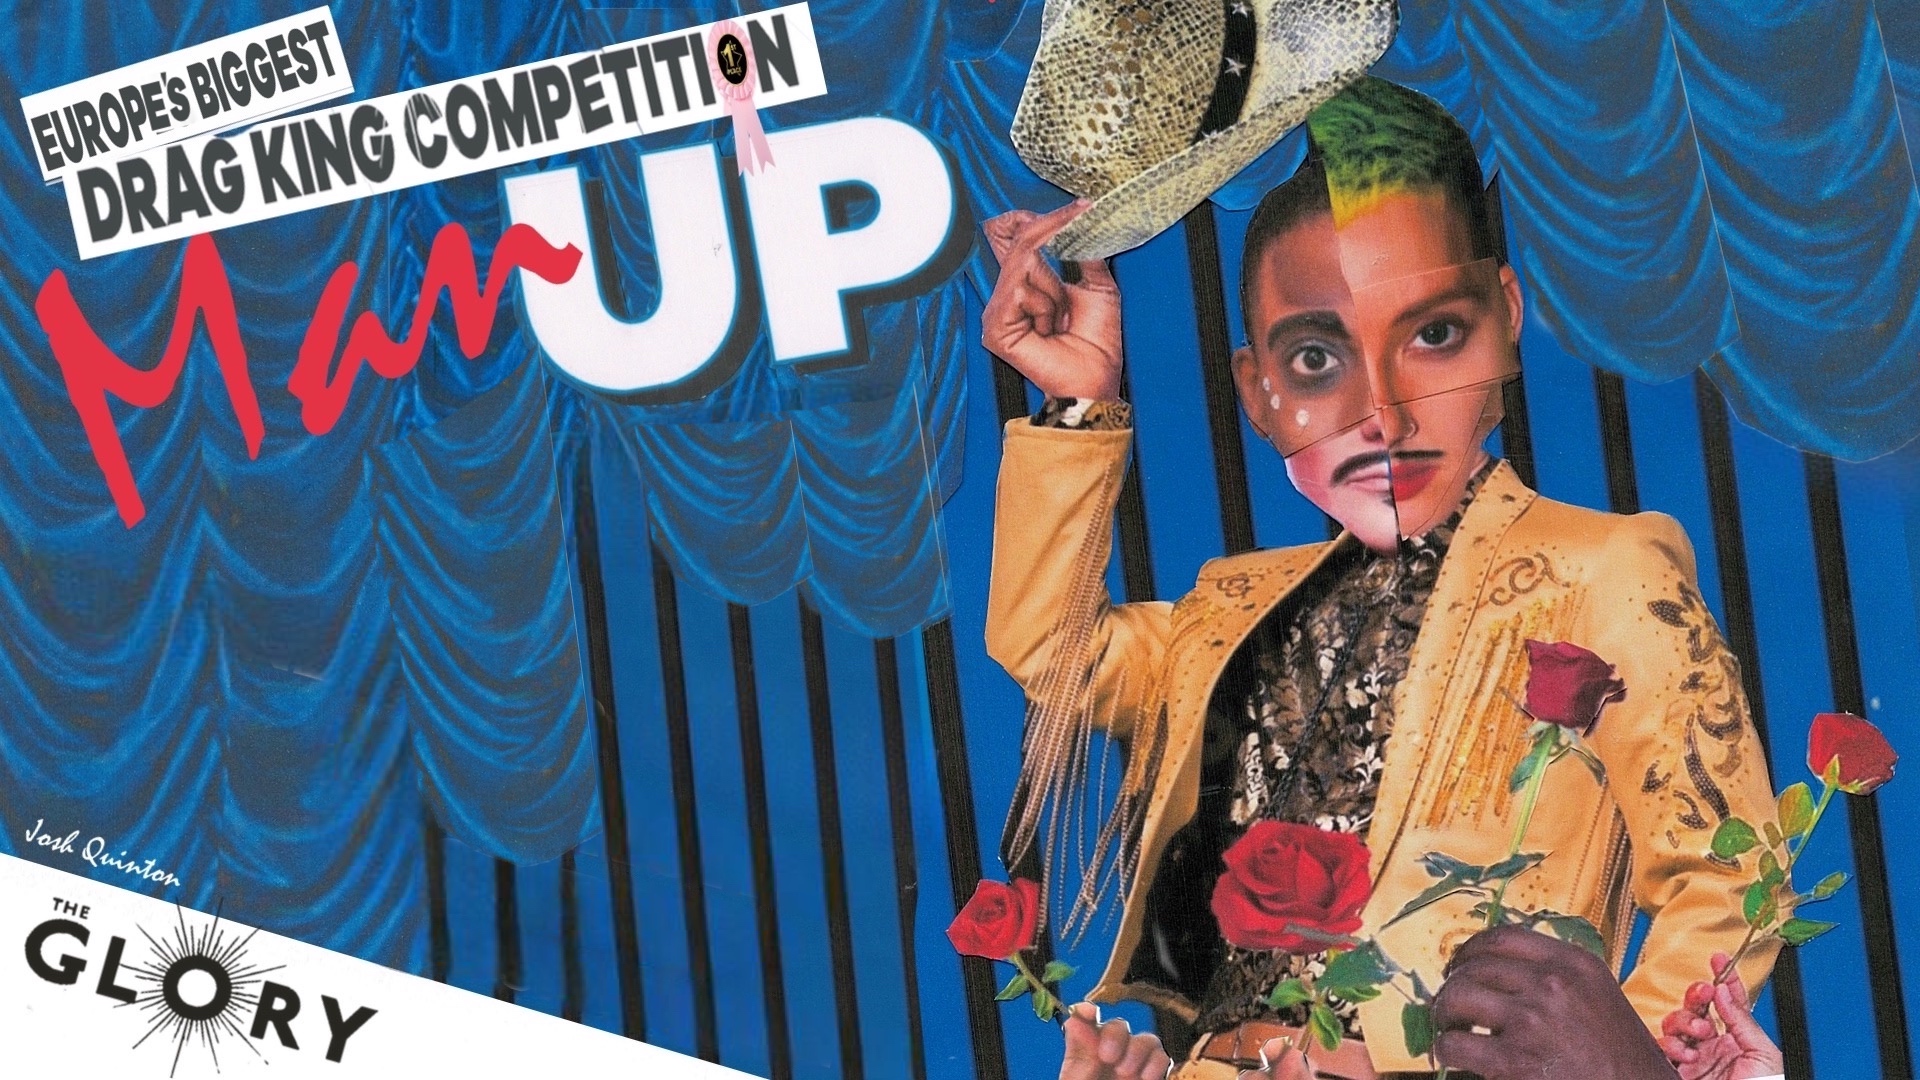 Man Up! Drag King Competition – HEAT 3